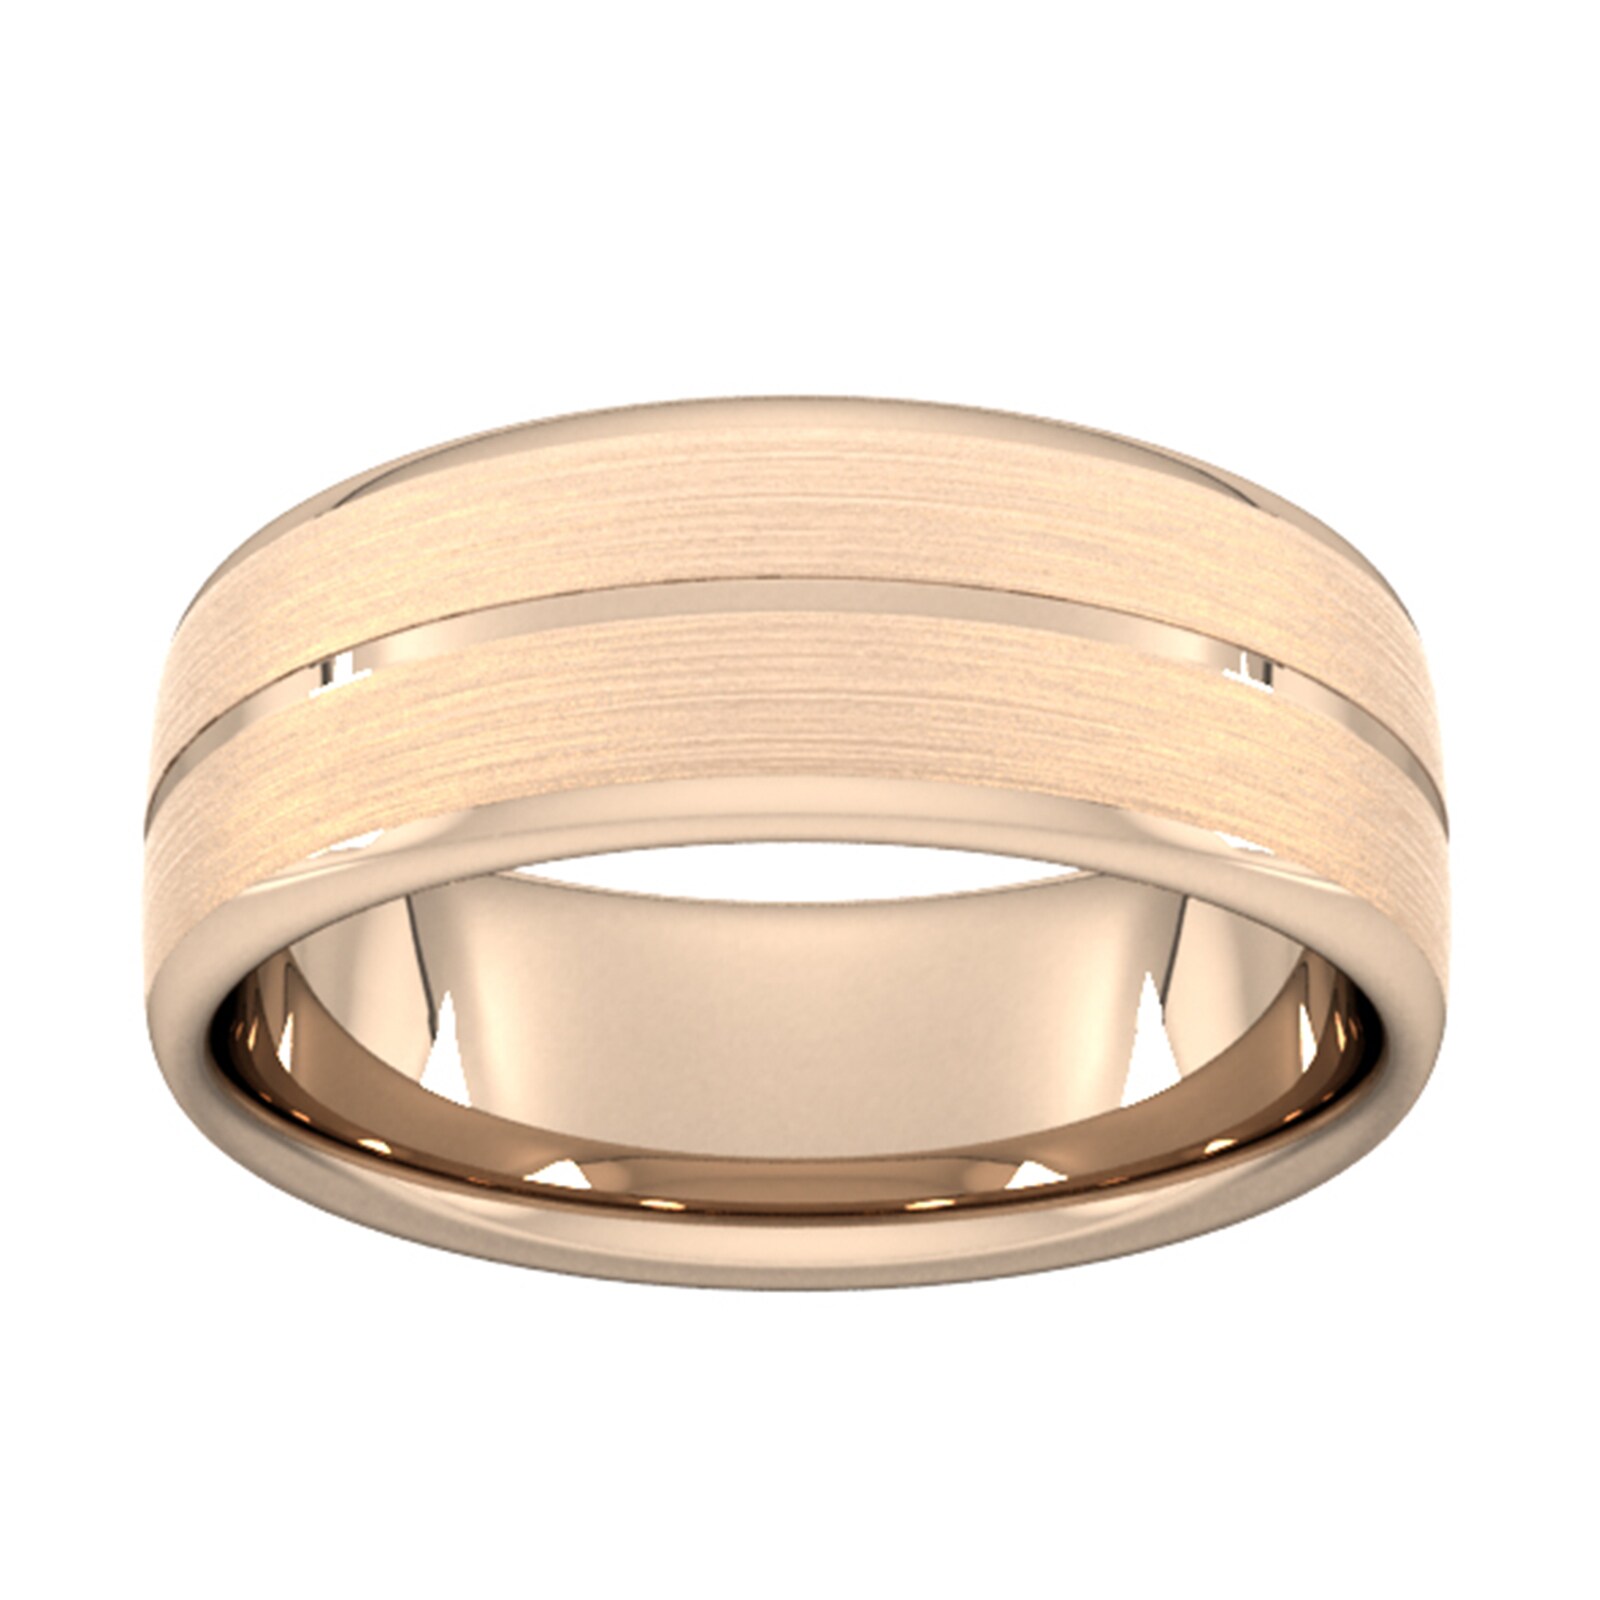 8mm Flat Court Heavy Centre Groove With Chamfered Edge Wedding Ring In 18 Carat Rose Gold - Ring Size Q